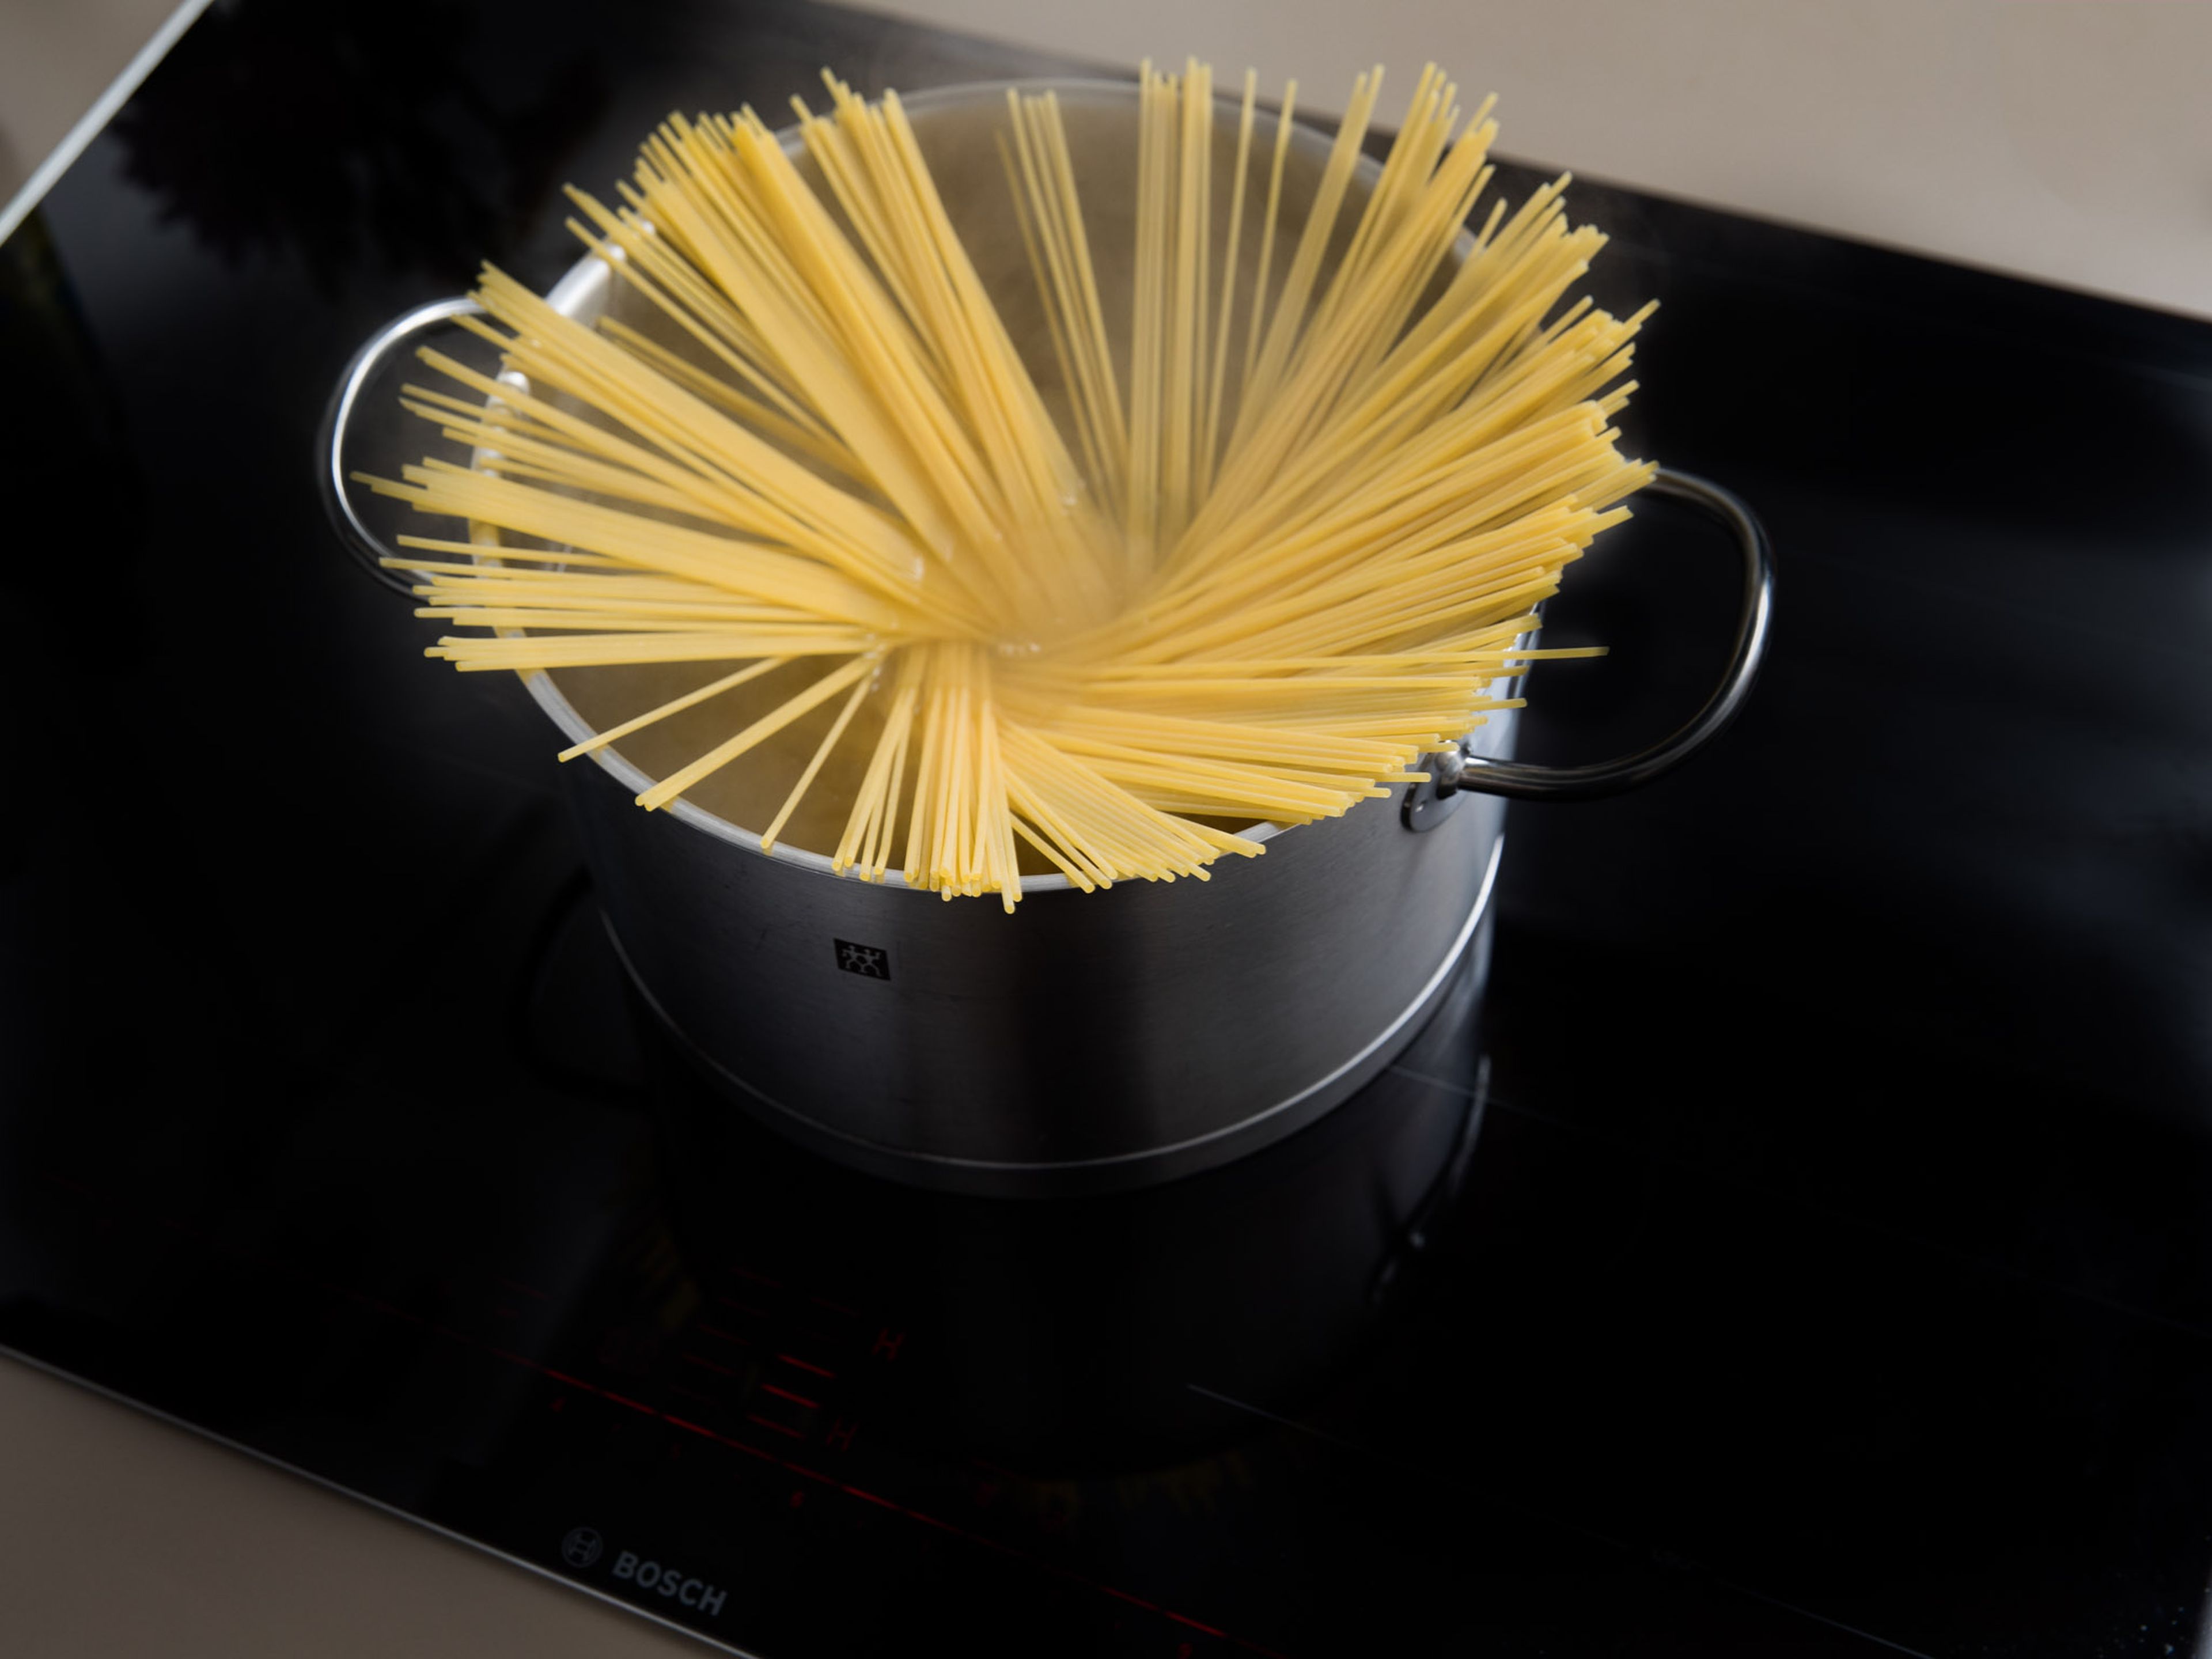 Bring a large pot of salted water to a boil. Add spaghetti and cook until al dente, approx. 7 – 9 min. Reserve about 100 ml/ 1/2 cup pasta water, then drain.